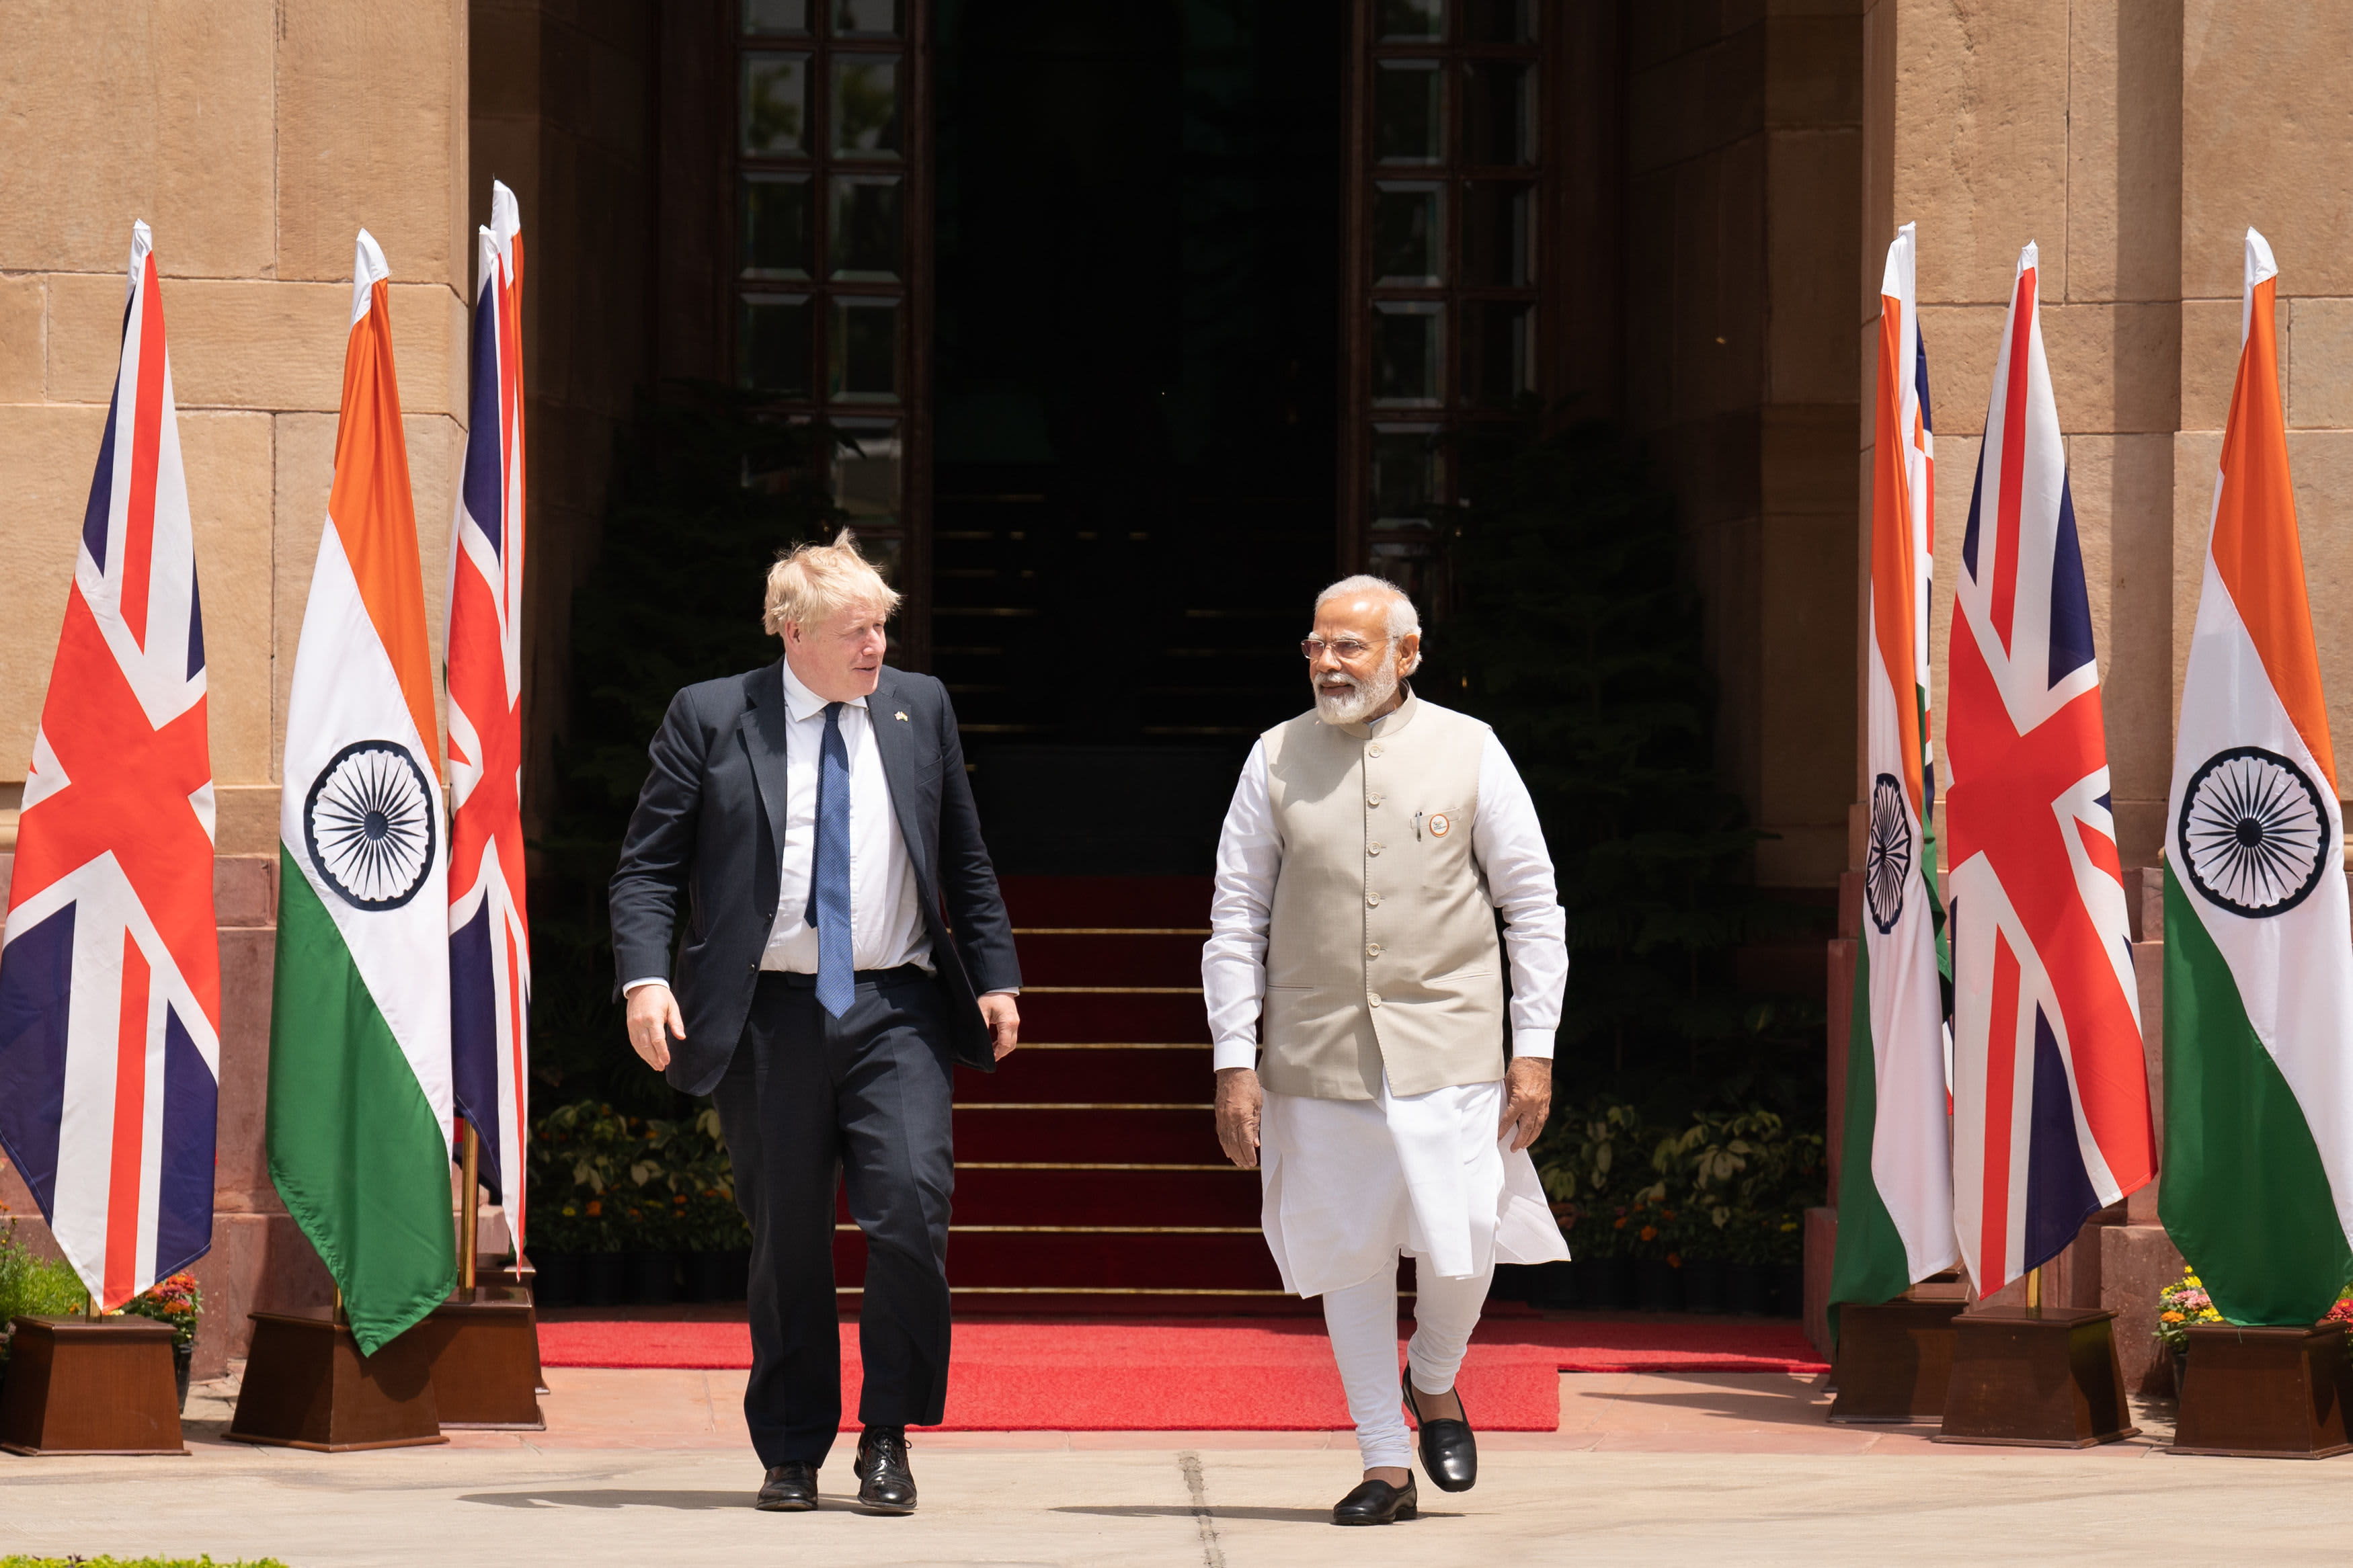 britain and india aim for free trade deal by october, says johnson